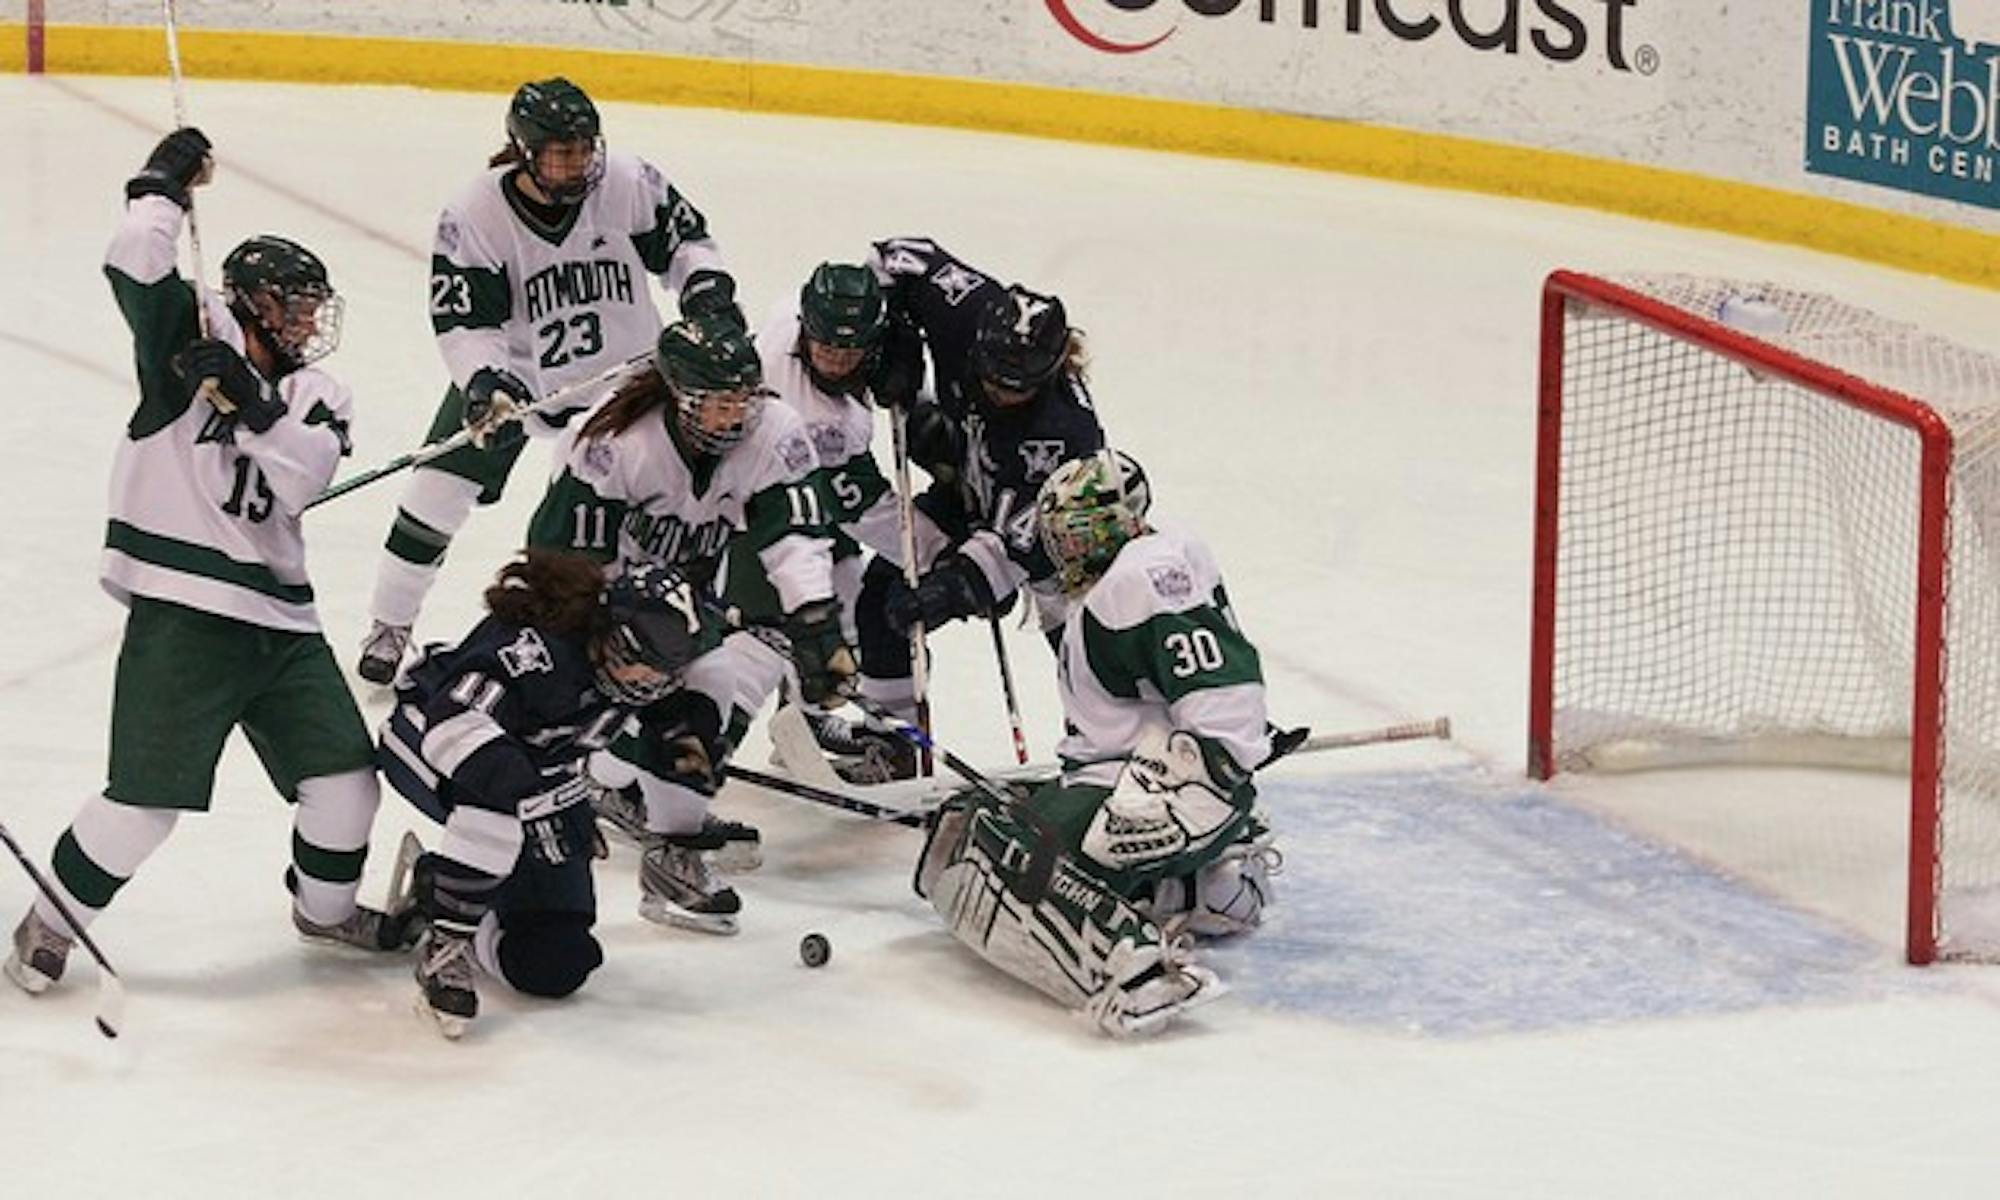 The women's hockey team extended its winning streak to four games with victories against Yale and Brown.